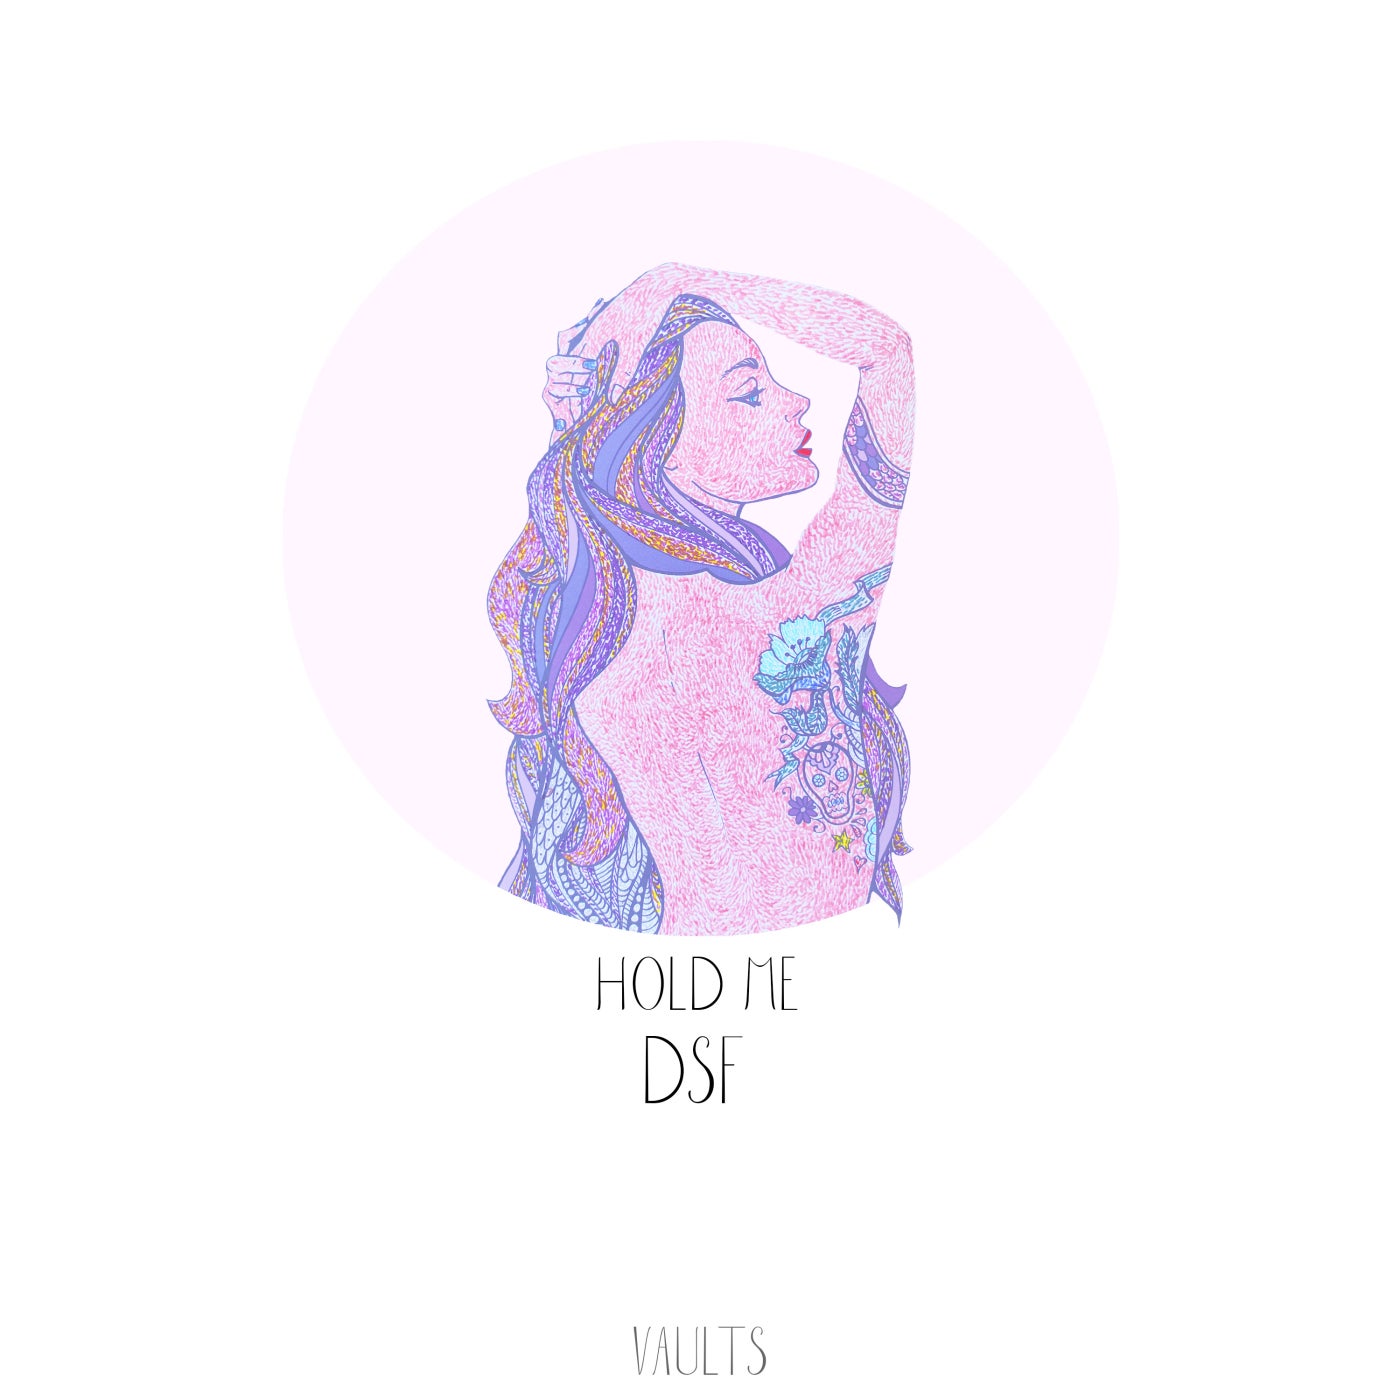 DSF - Hold Me on VAULTS